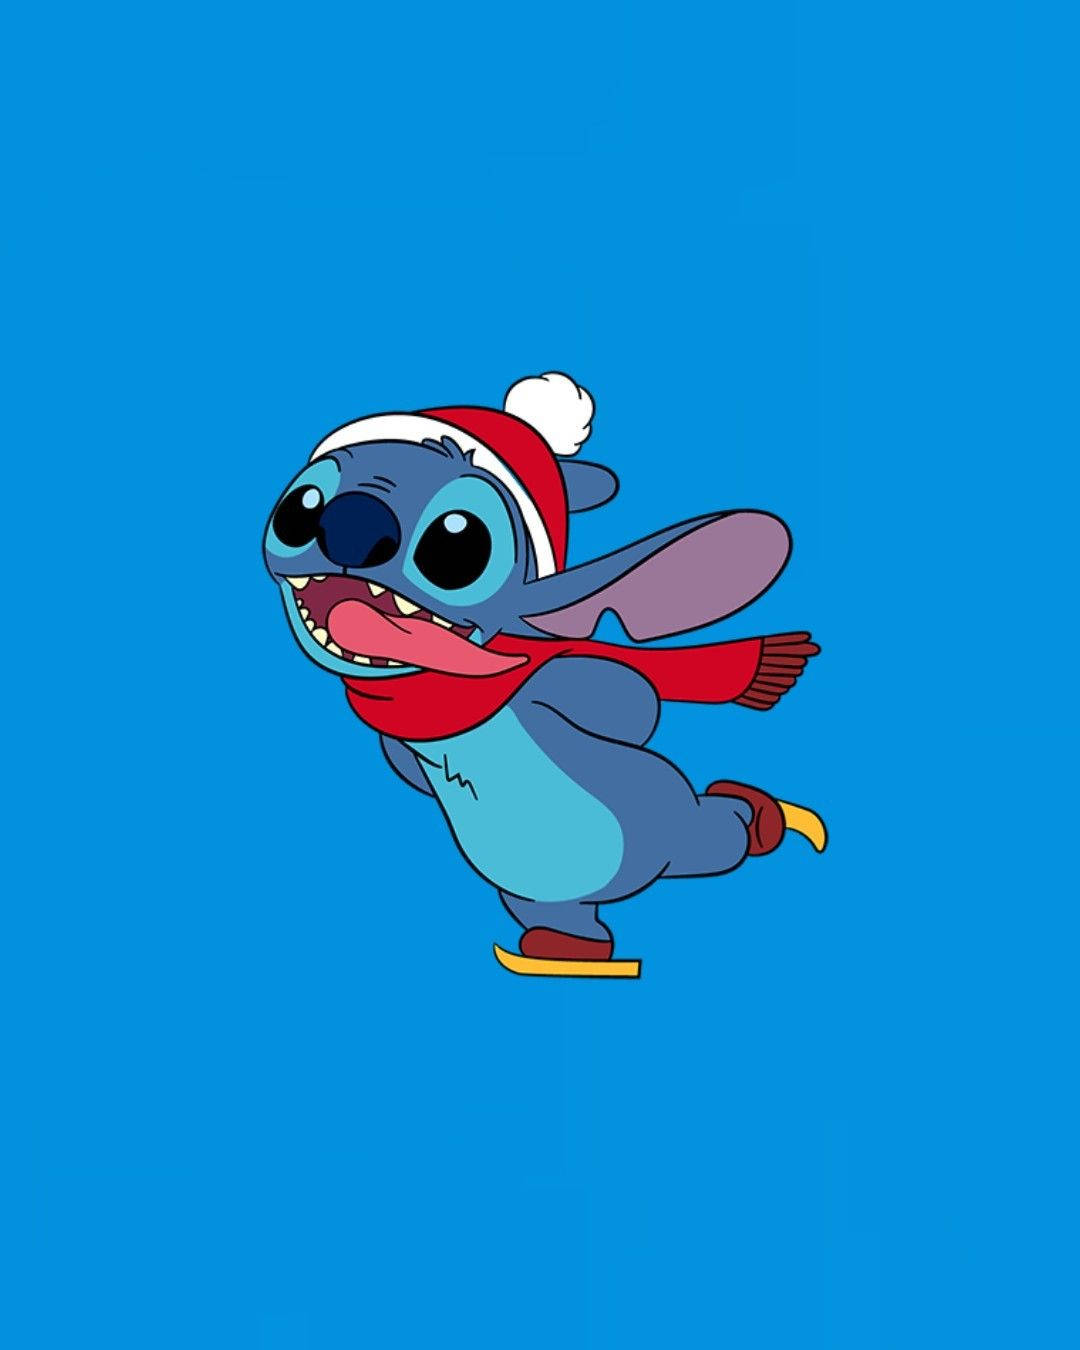 Aesthetic Stitch Disney Wallpapers  Top Free Aesthetic Stitch Disney   Lilo and stitch drawings Cute disney wallpaper Stitch disney